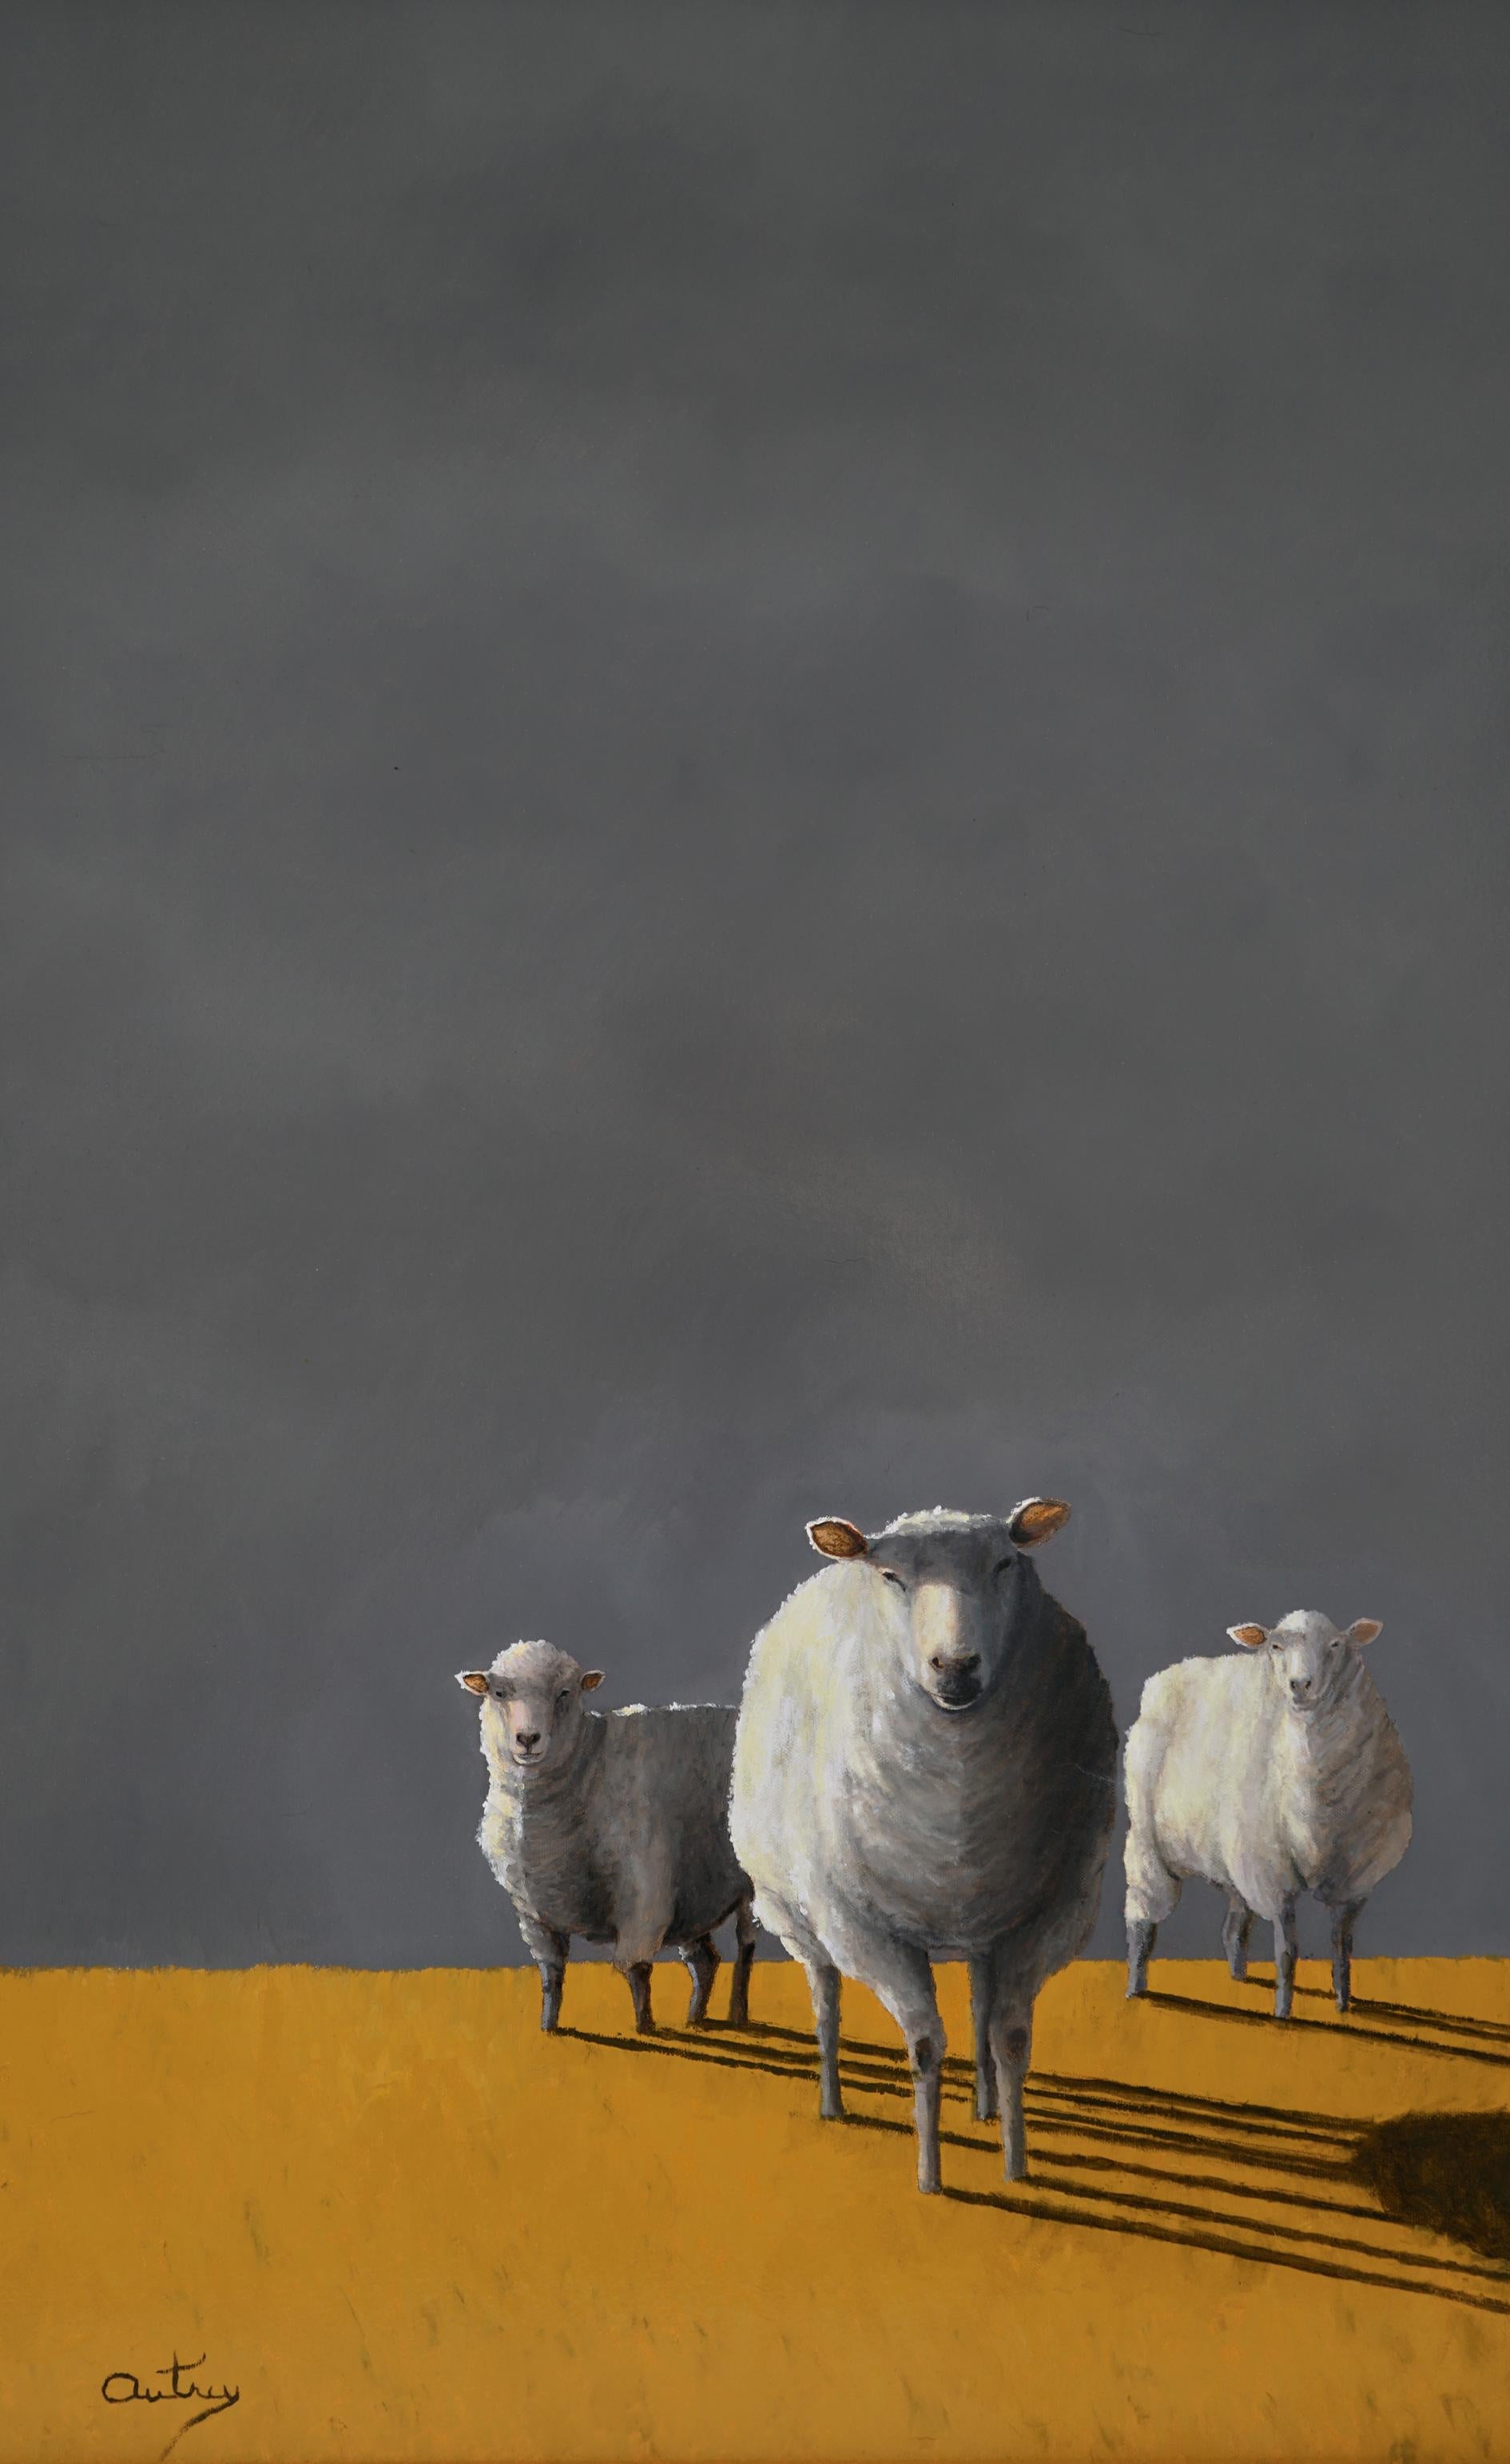 A TIME TO SHEAR    Realism Light and  Shadow, Sheep  Ovis (Latin) Oil on Canvas - American Realist Painting by Luke Autrey